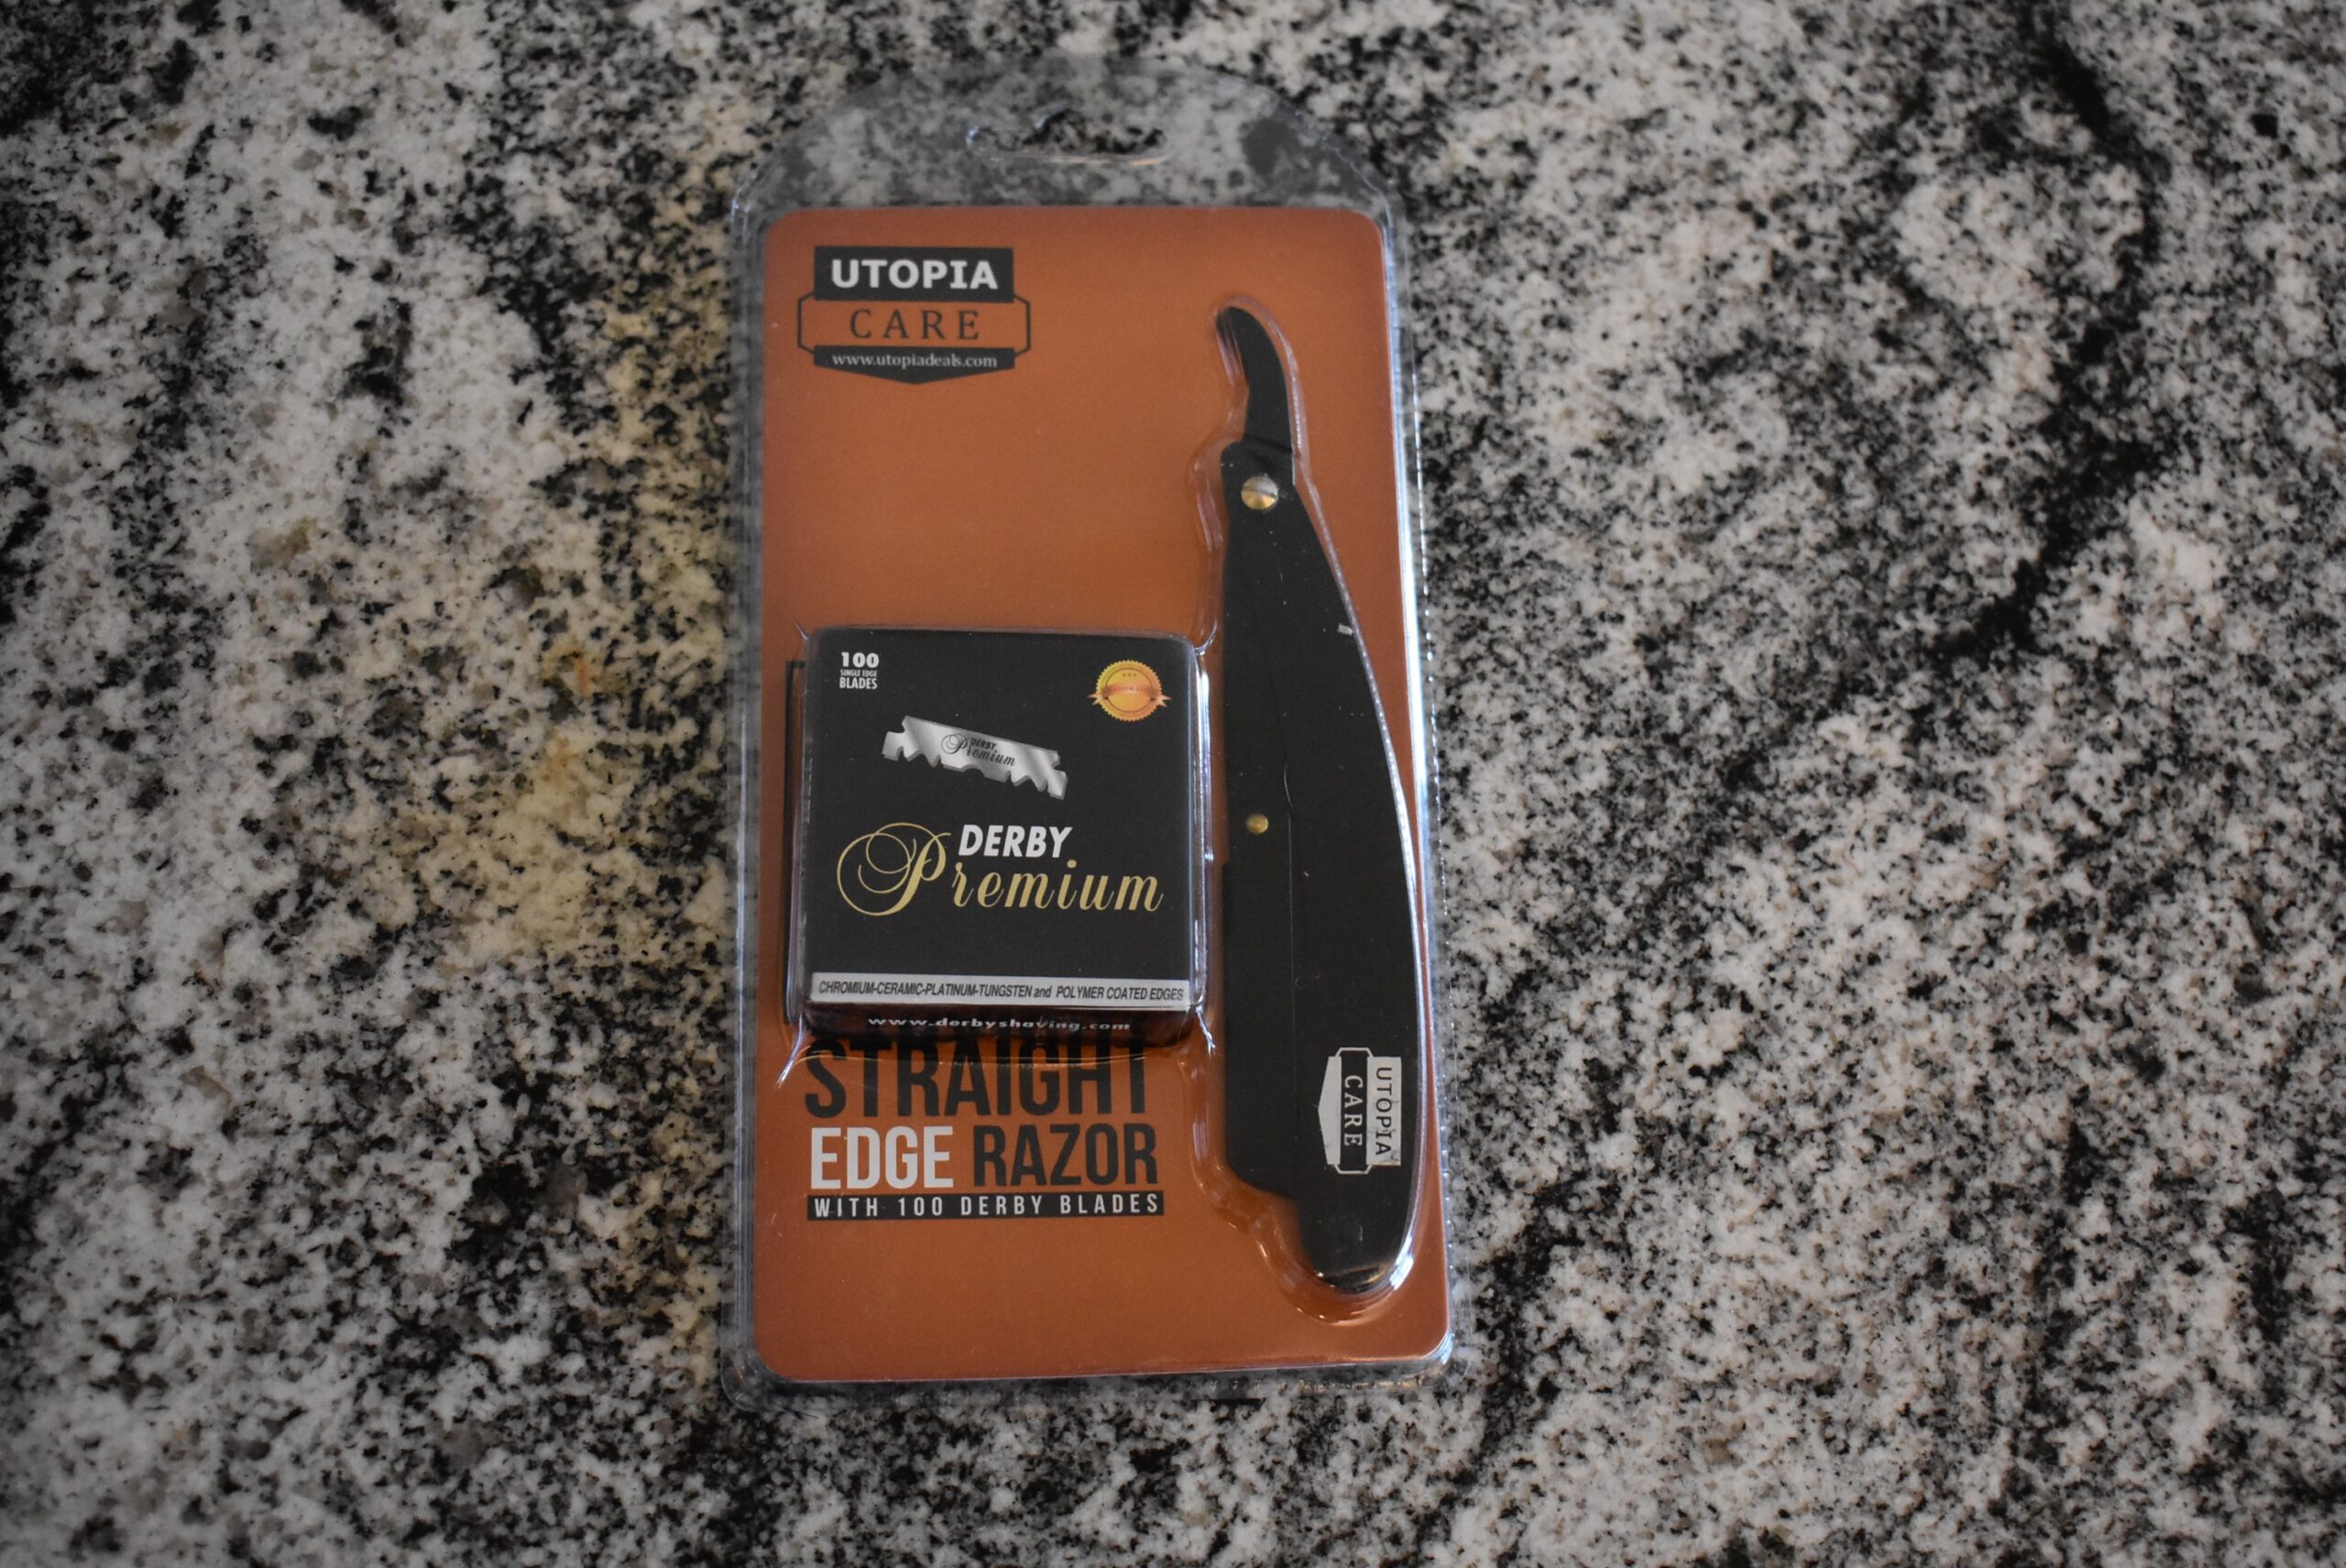 One of the best straight razors, the Utopia care straight razor in its package and on a counter